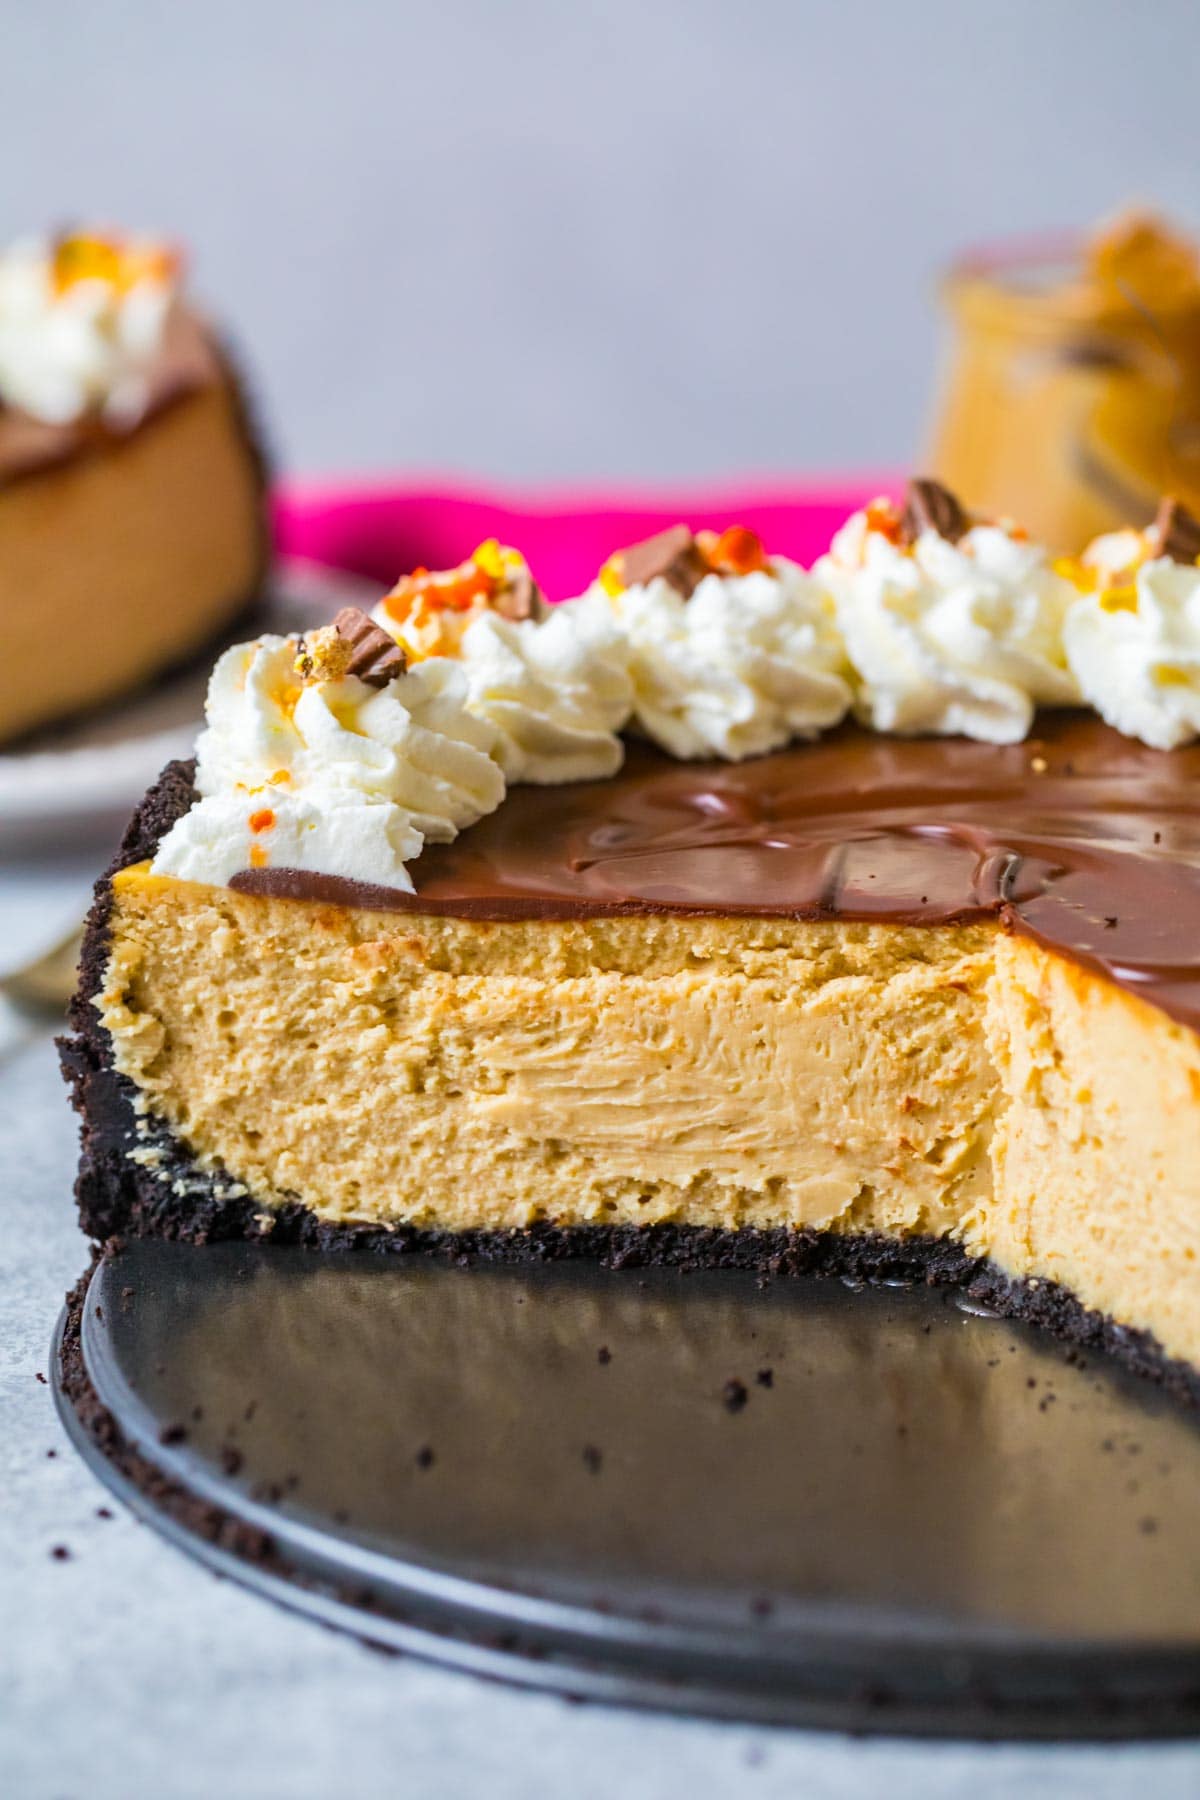 Cross section of a cheesecake made with peanut butter and chocolate ganache on an Oreo crust.